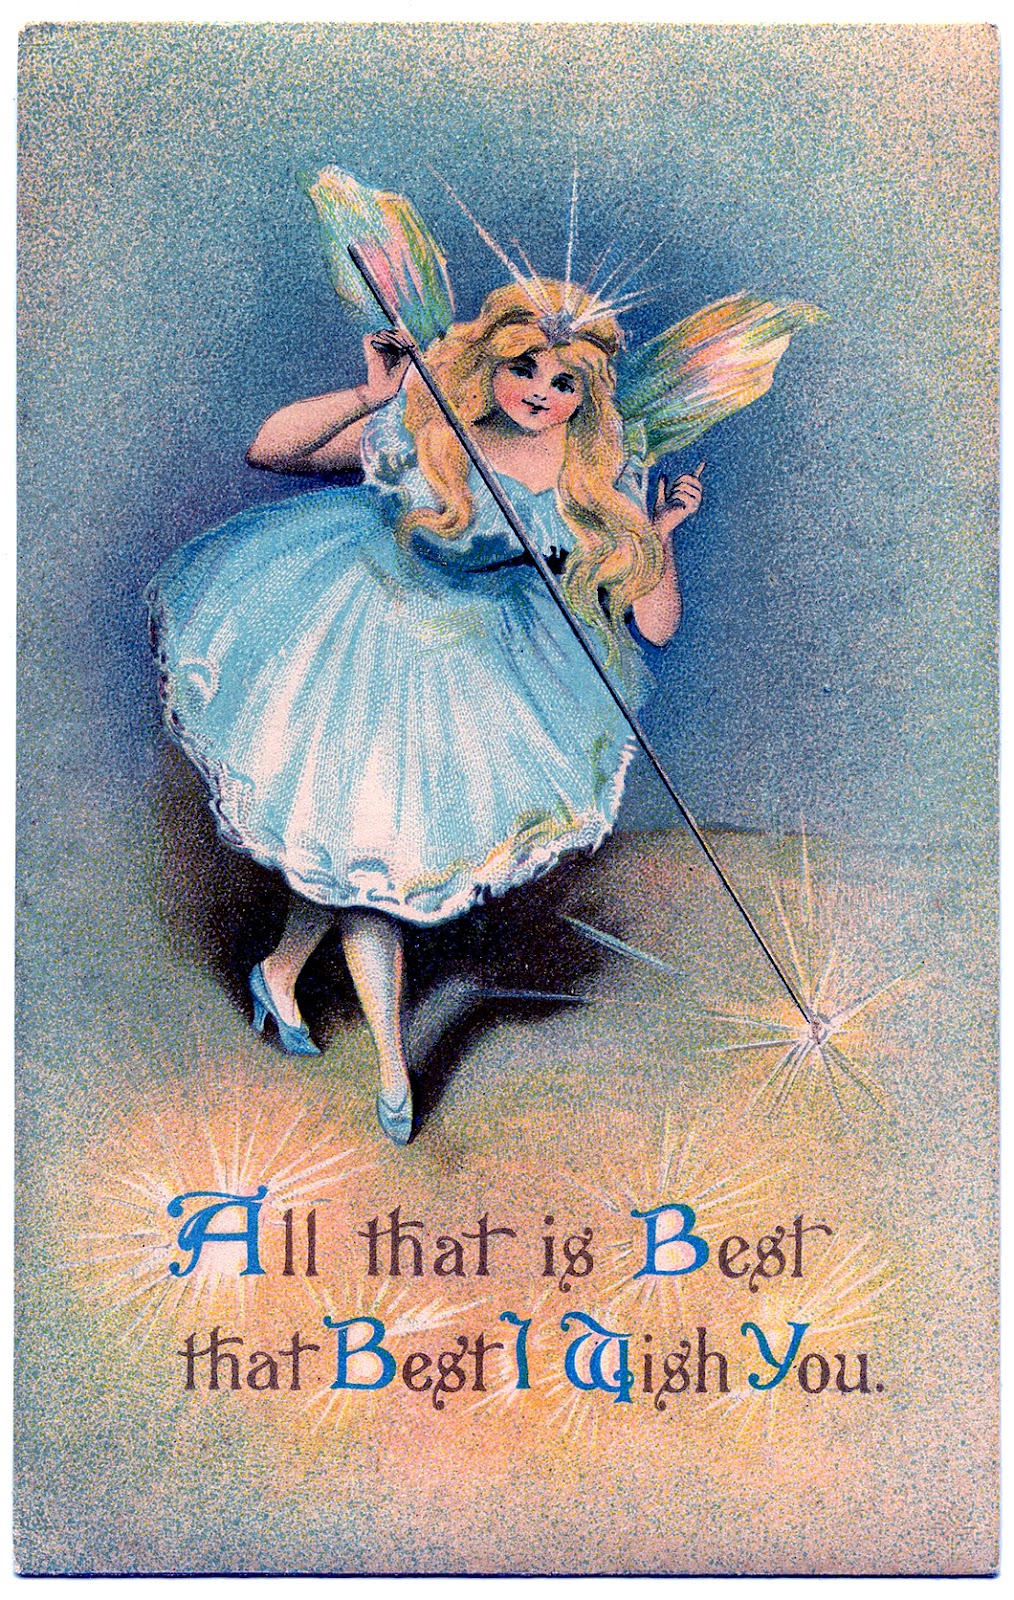 Vintage Image - Pretty Fairy with Blue Dress - The Graphics Fairy